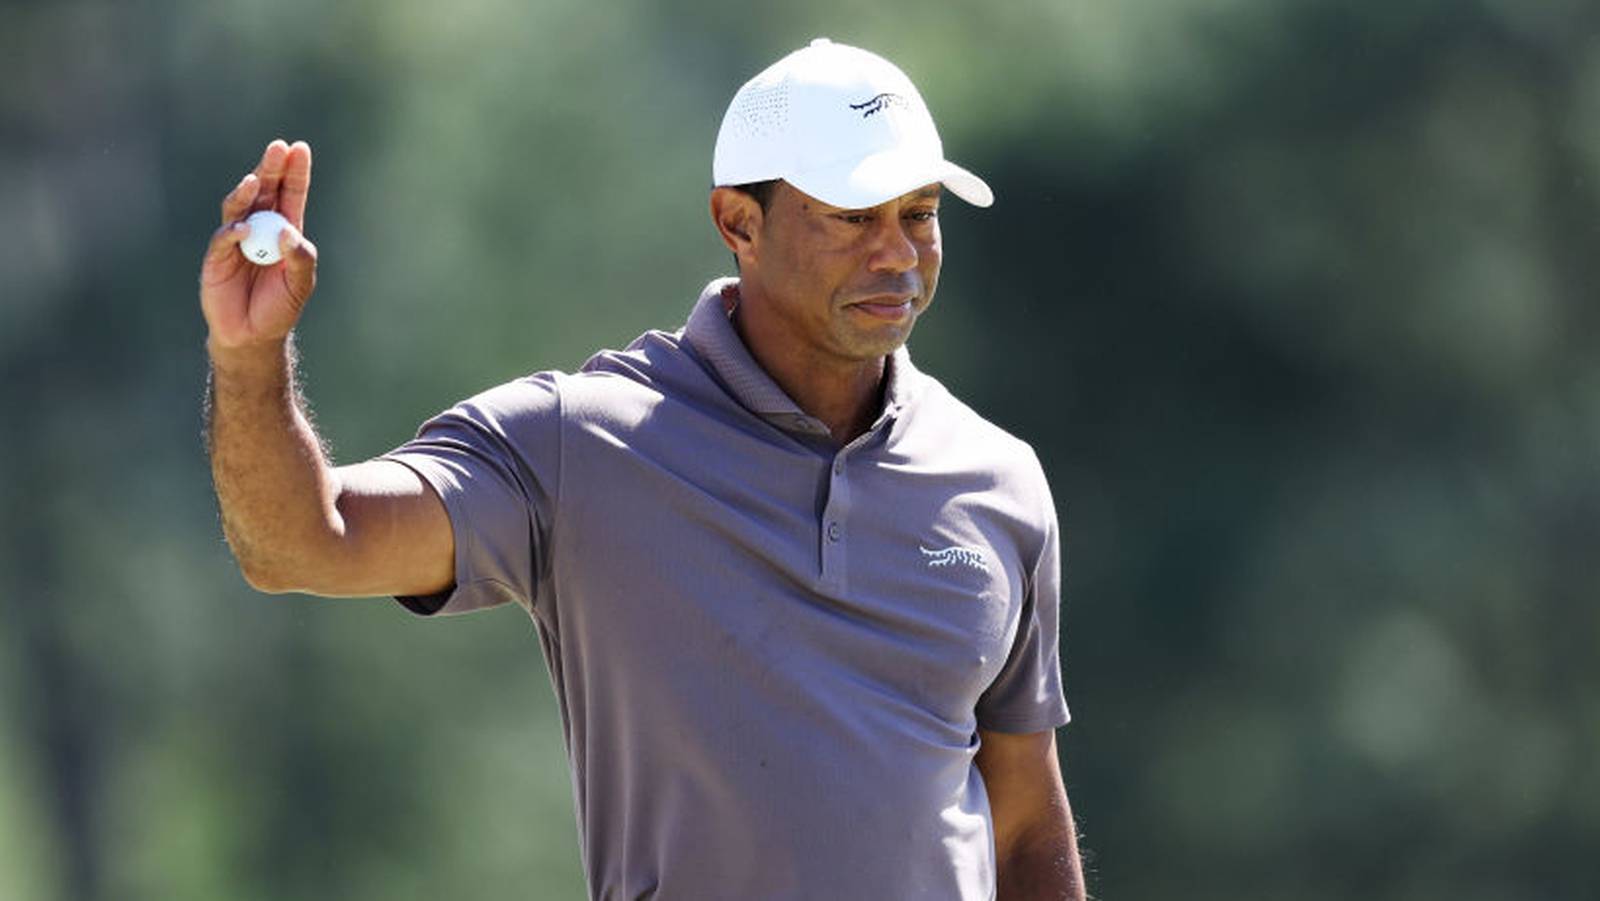 Tiger Woods makes the cut for the Masters for 24th time in a row K99.1FM